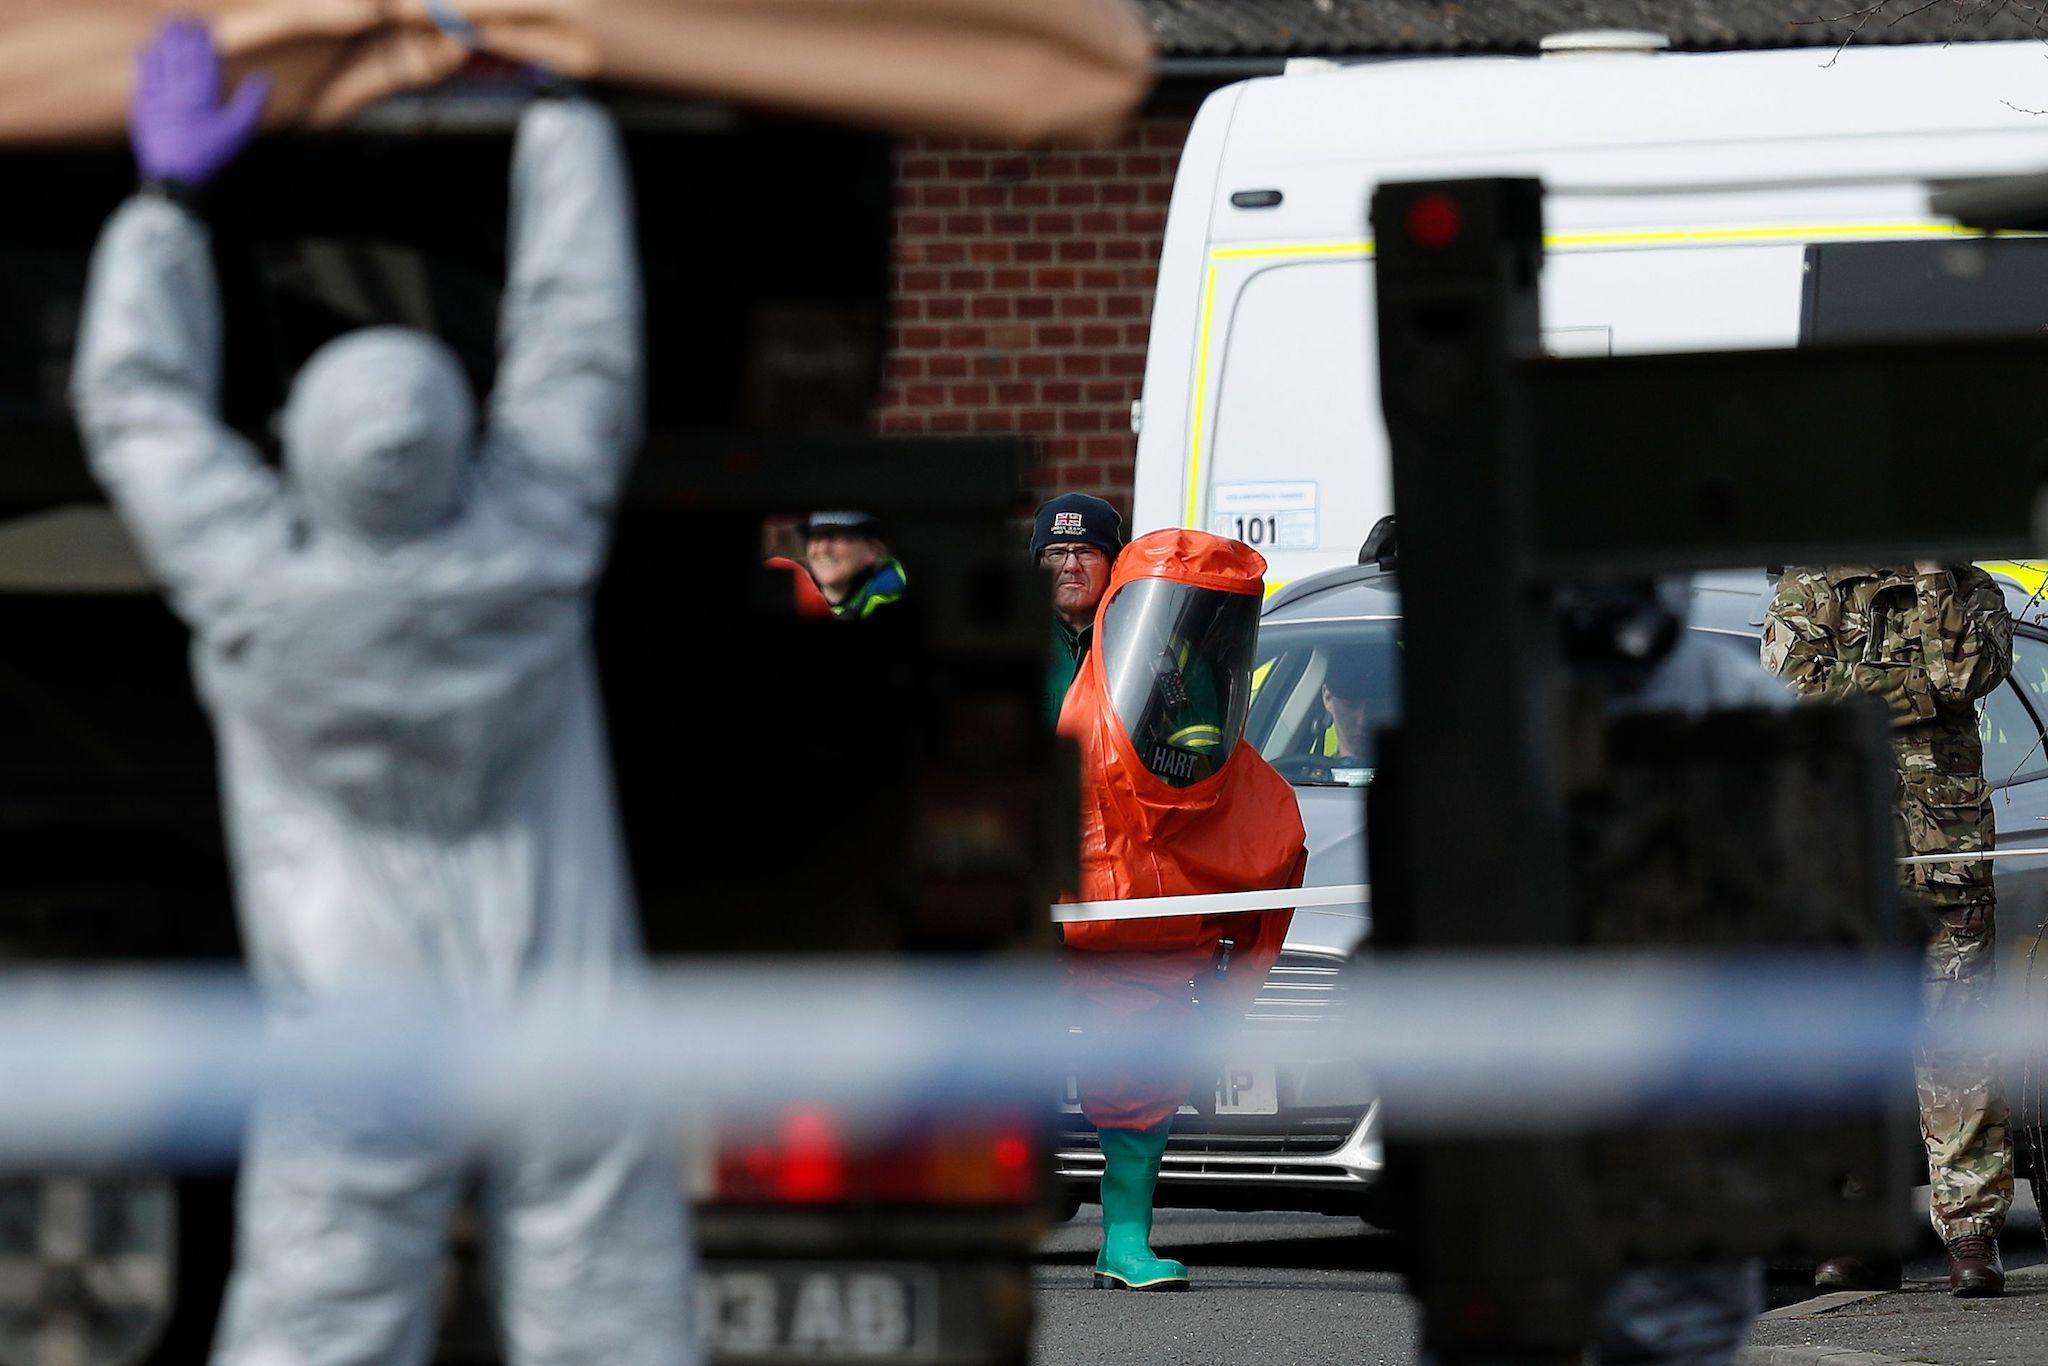 The clean-up in Salisbury after the first attack, which authorities insist removed all threat from the areas affected